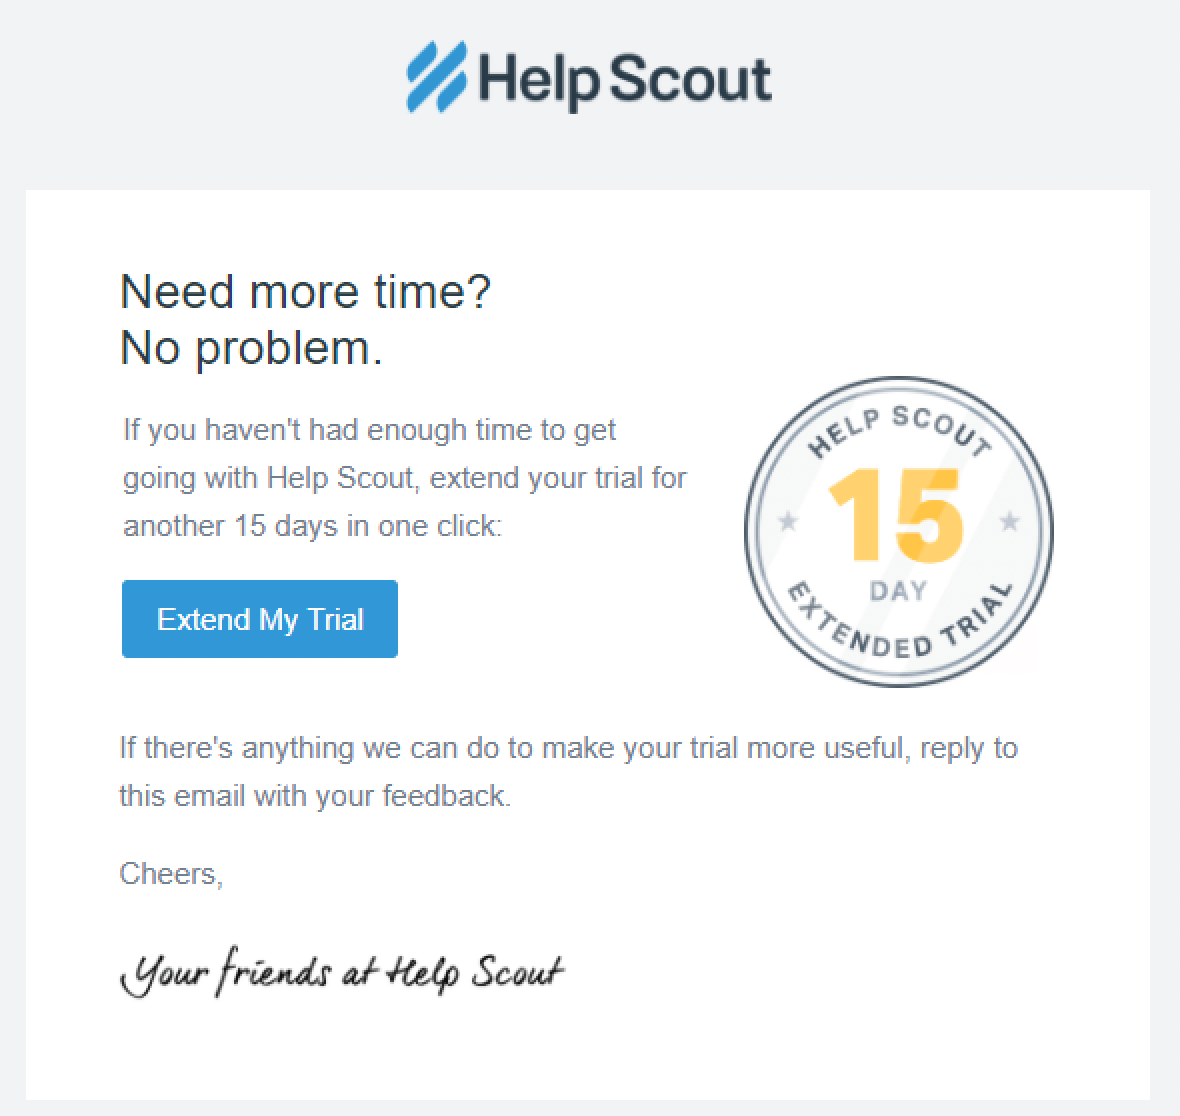 Re-engagement email example from Help Scout